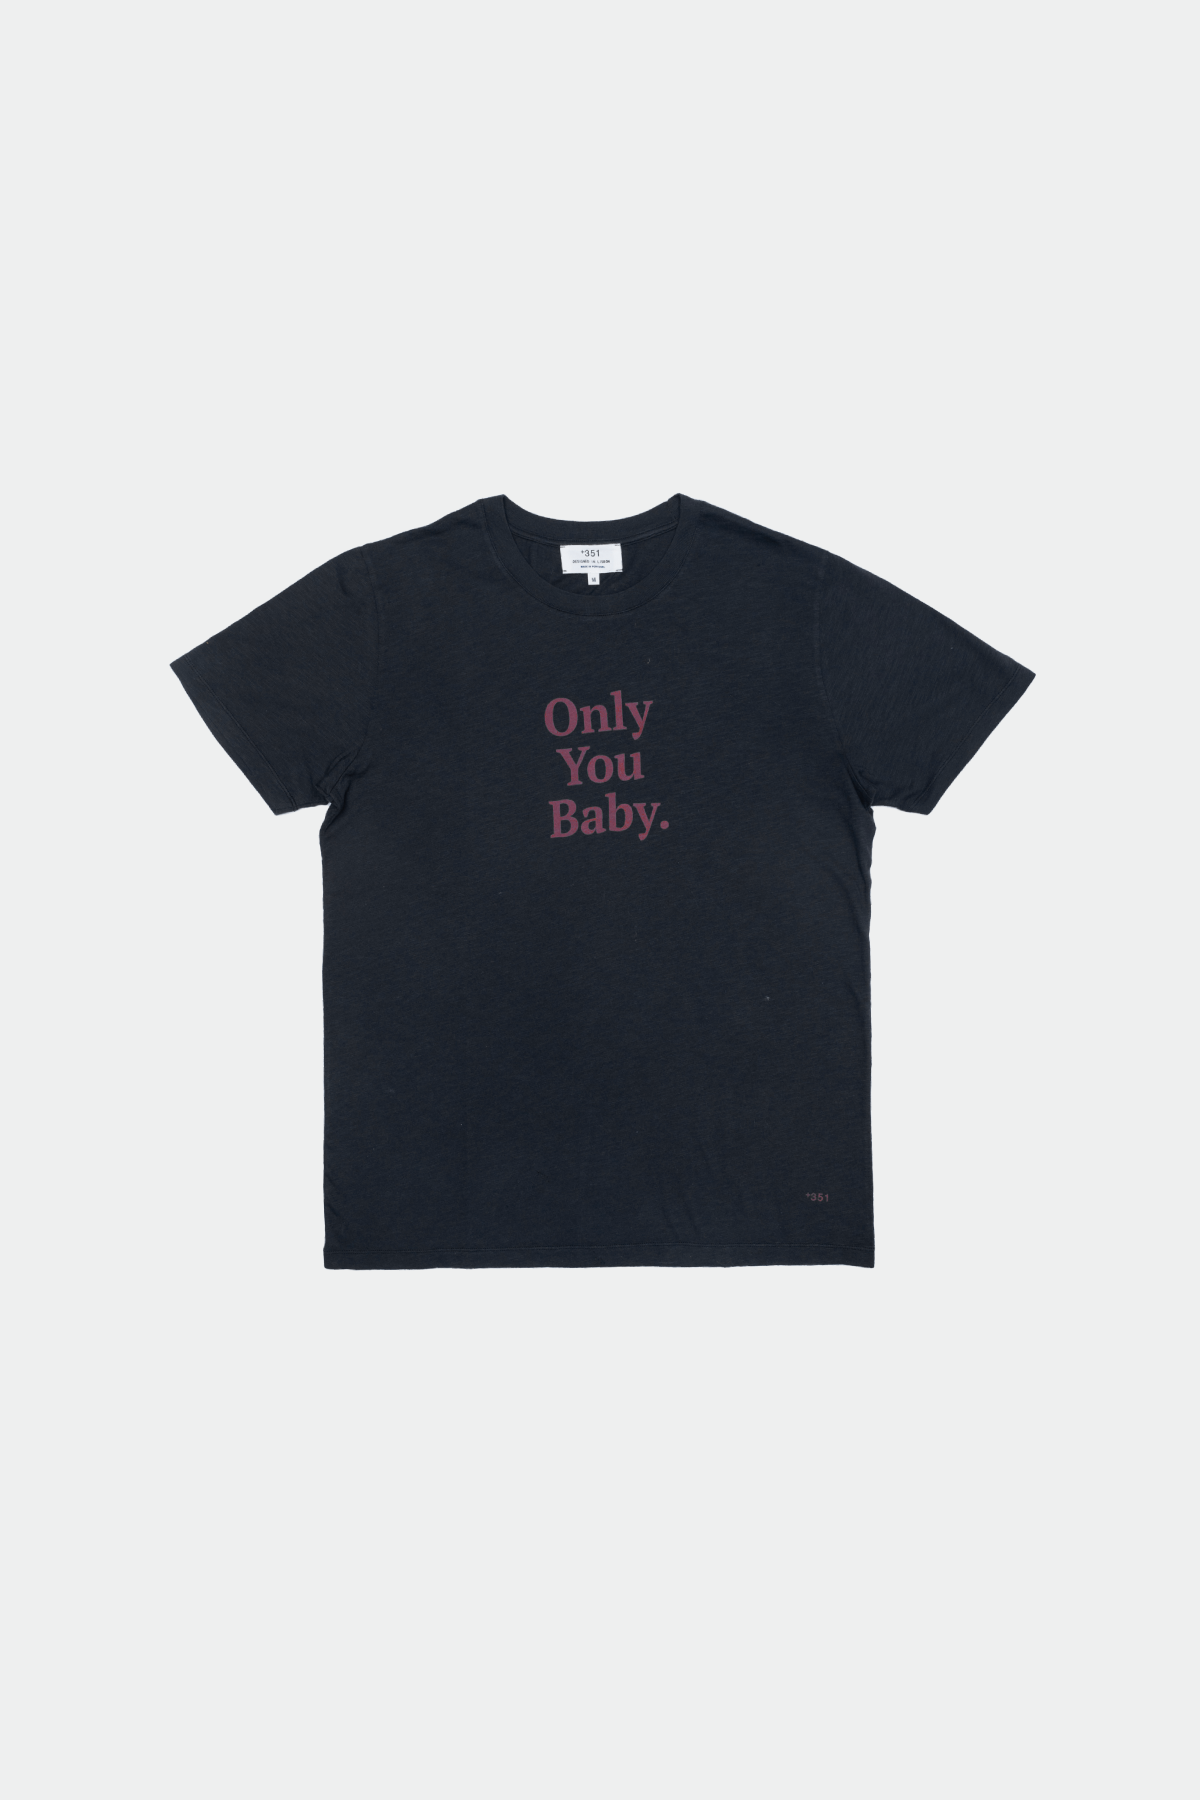 T-SHIRT GRAPHIC ONLY YOU BABY CHARCOAL & AUBERGINE